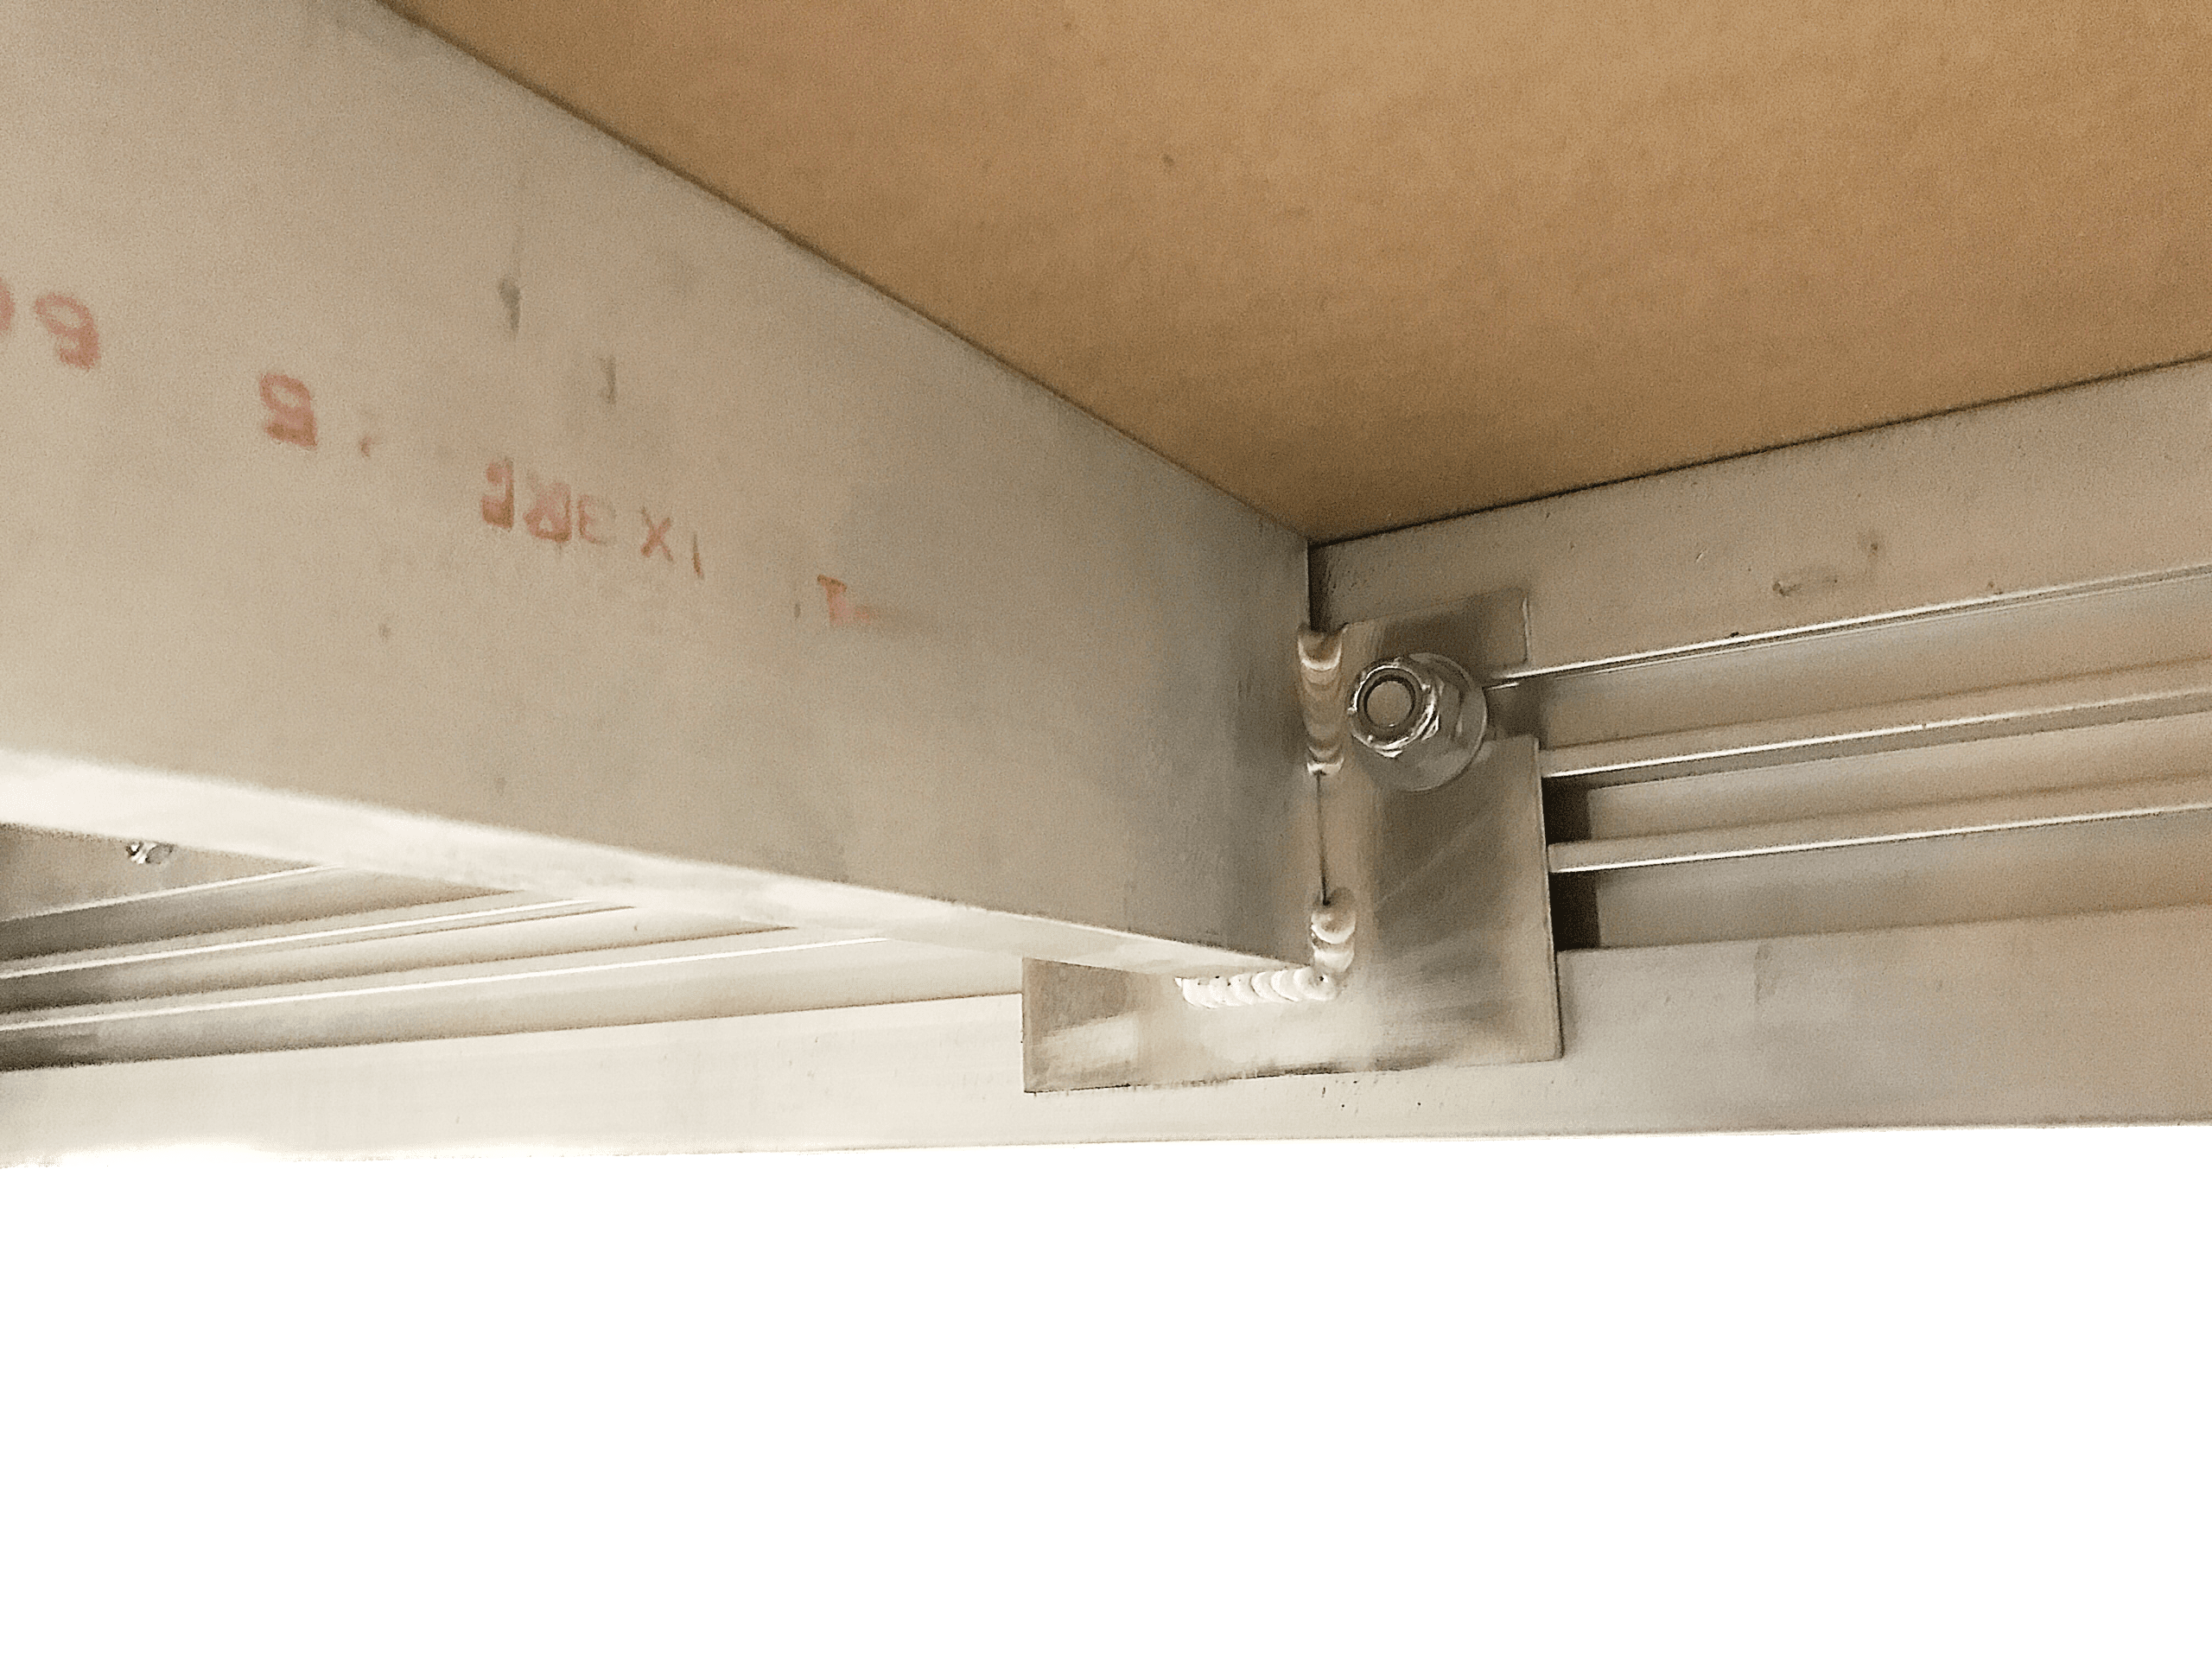 Movable joist extrusions allow joists to be added to our UNI-DEC and adjusted as needed.